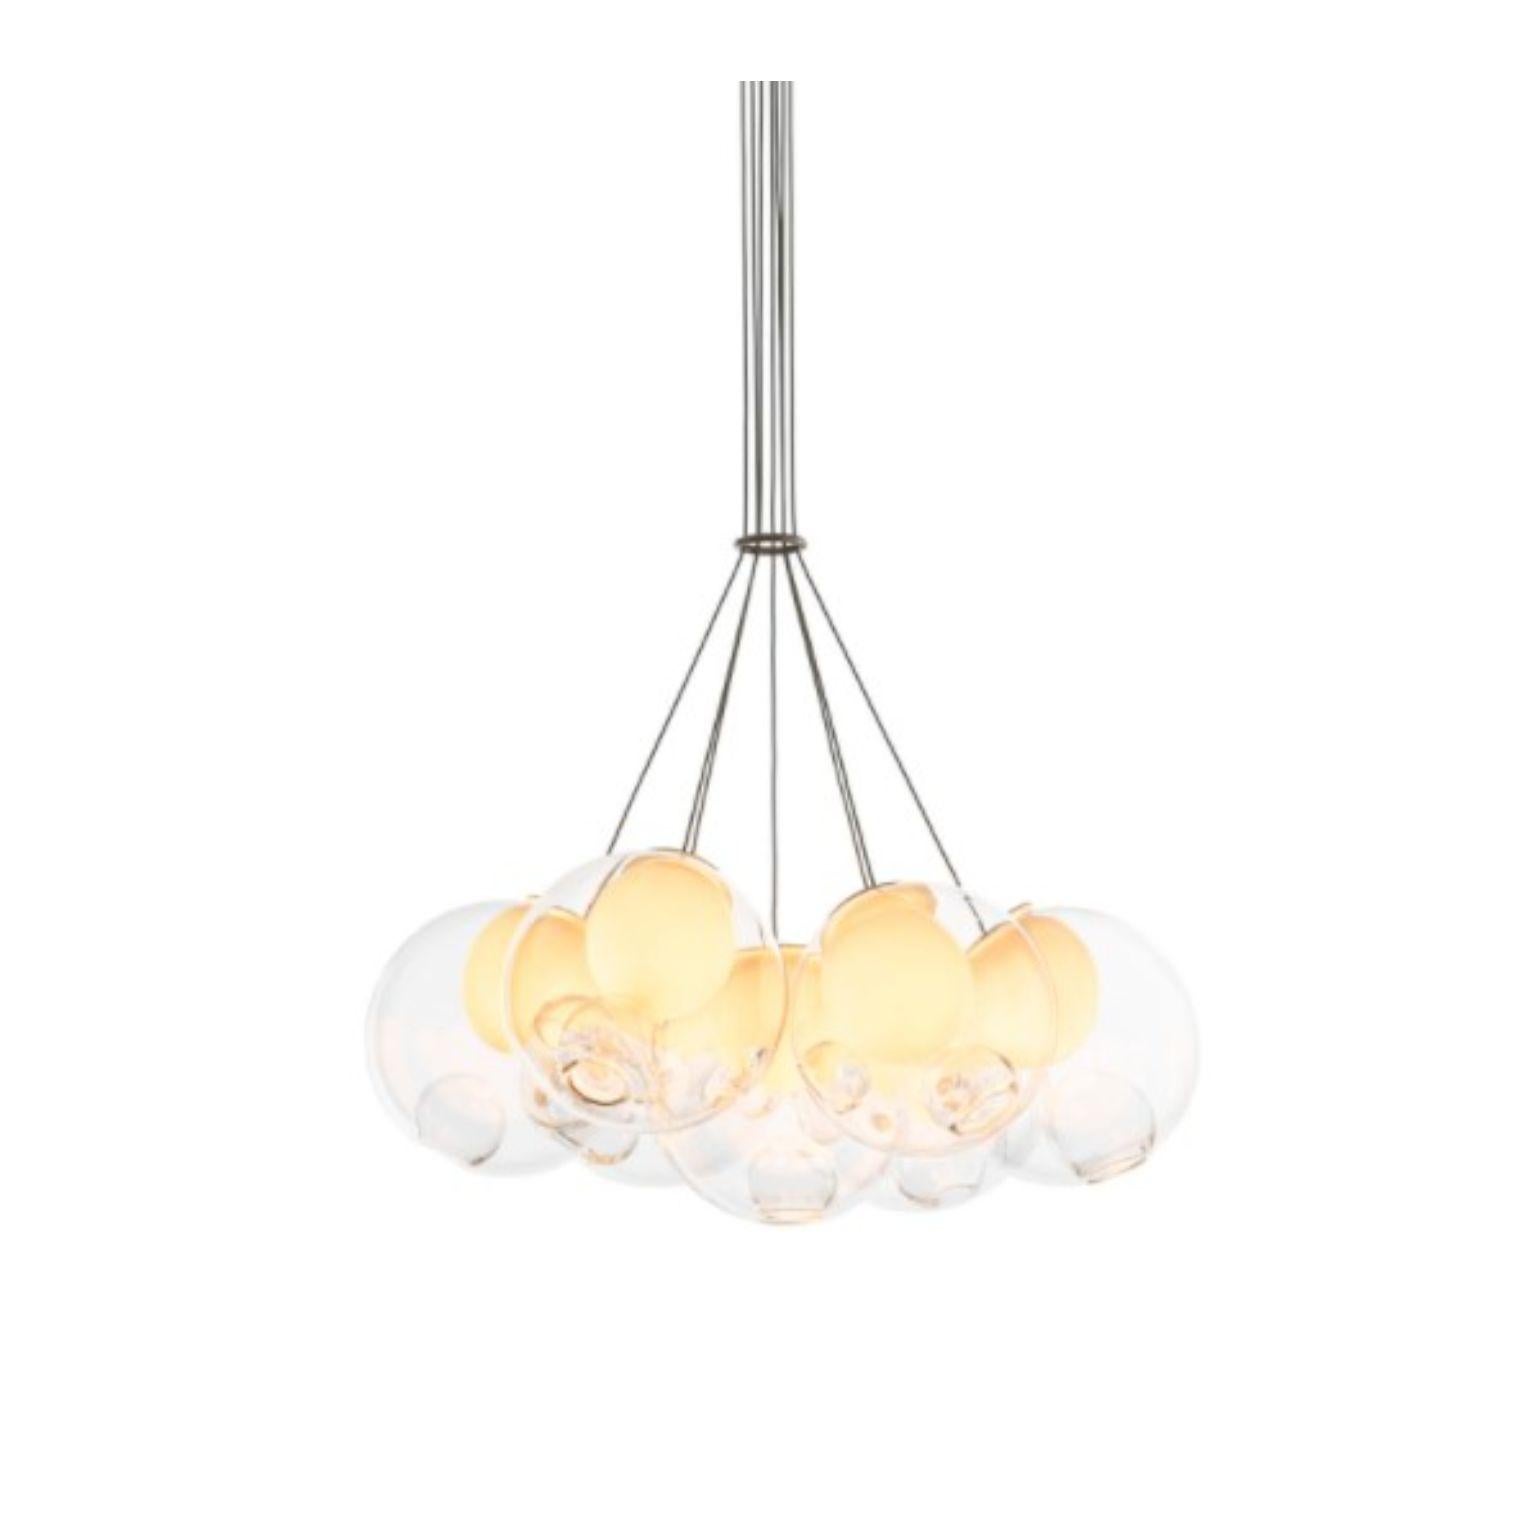 28.7 pendant by Bocci
Dimensions: D 20.3 x H 300 cm
Materials: white powder coated round canopy
Weight: 8 kg
Also available in different dimensions.
All our lamps can be wired according to each country. If sold to the USA it will be wired for